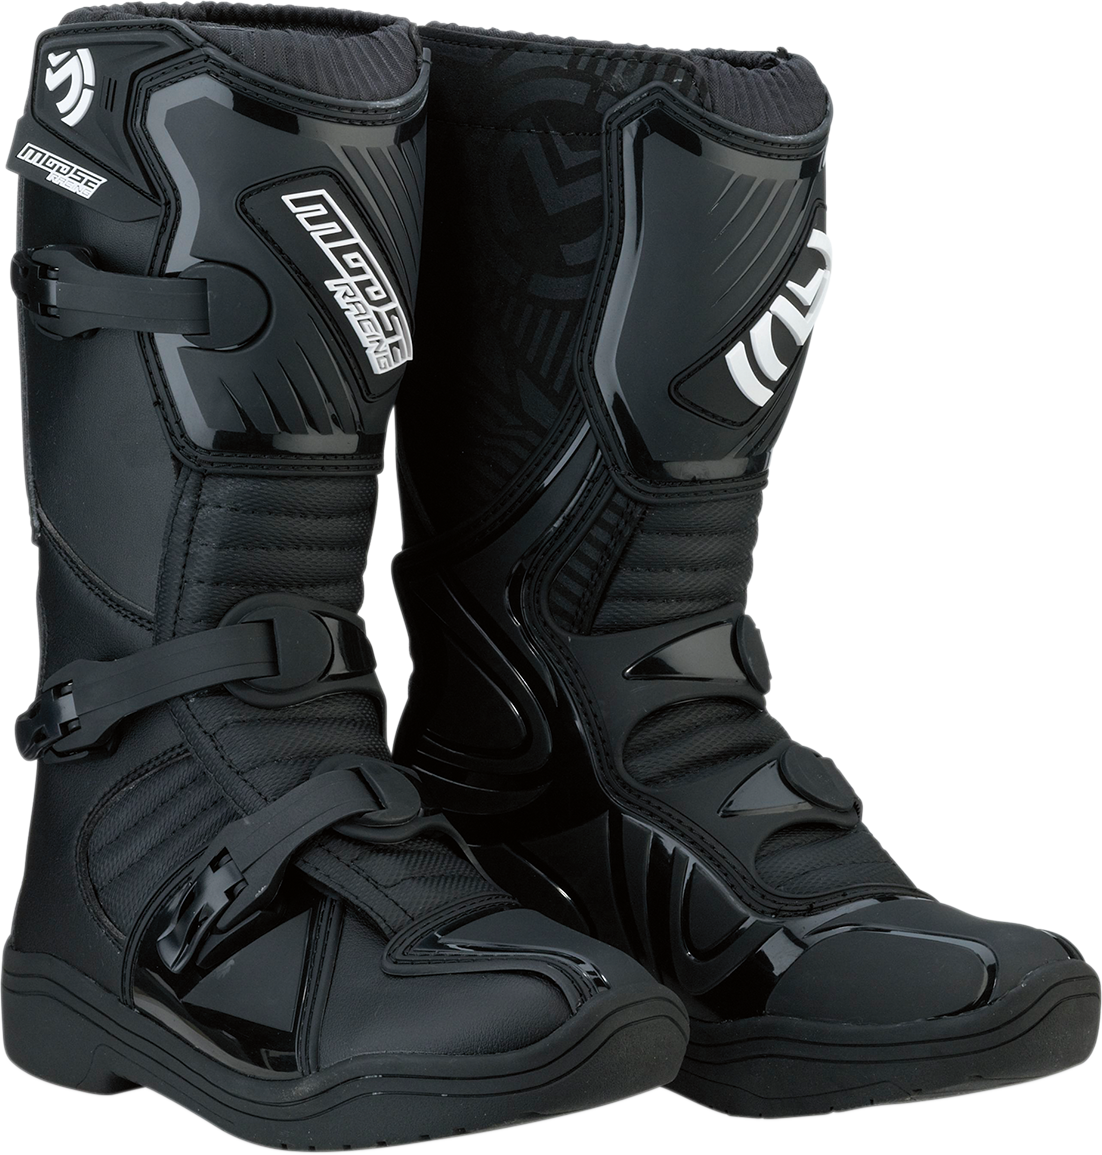 MOOSE RACING M1.3 Boots - Black - Size 4 3411-0426